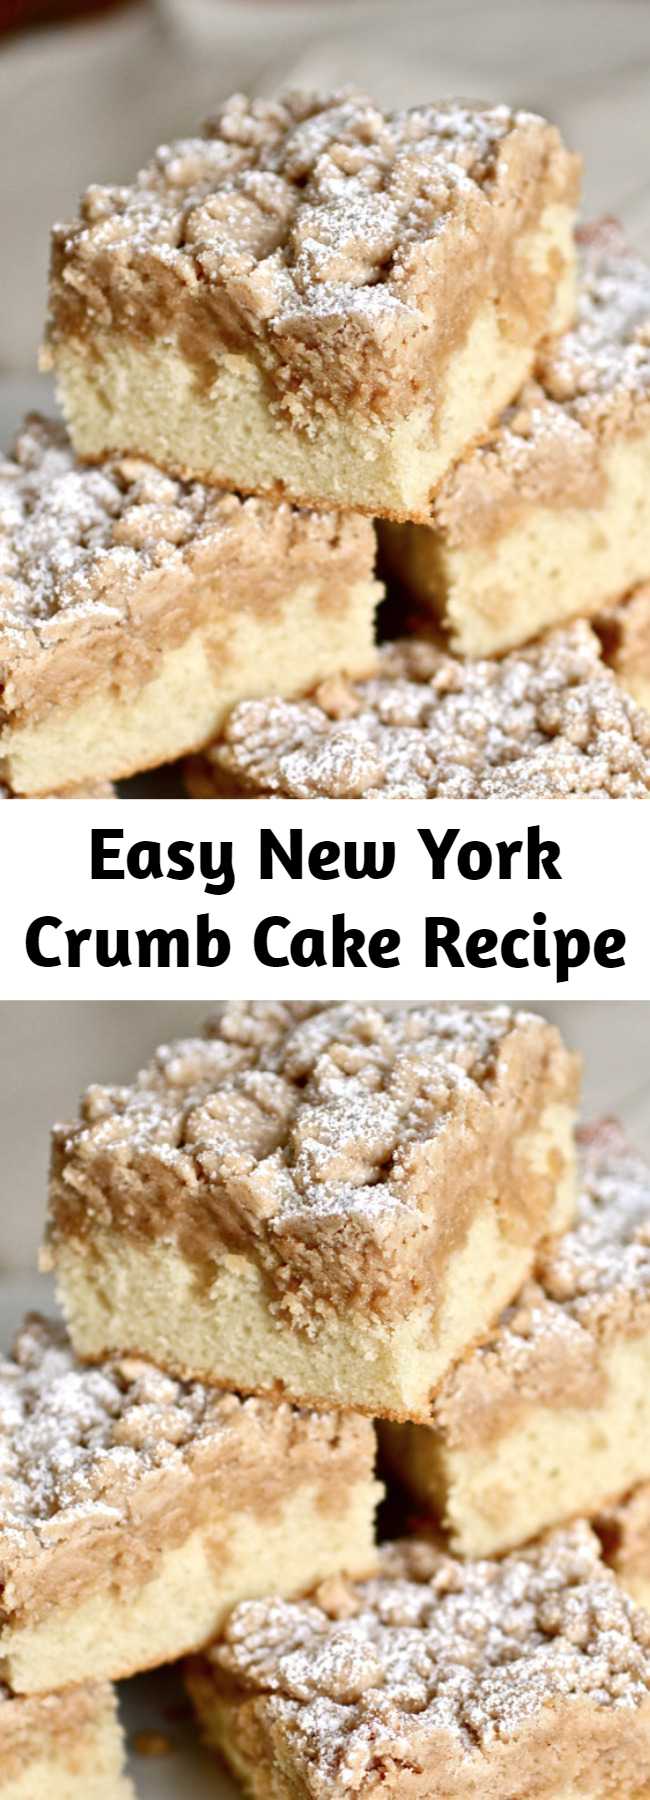 Easy New York Crumb Cake Recipe - This New York crumb cake is the absolute BEST recipe out there! It even beats out the Entemann's Ultimate Crumb Cake, according to discerning New Yorkers! With big crumbs and soft, buttery cake, this crumb cake will become an old family favorite in no time.